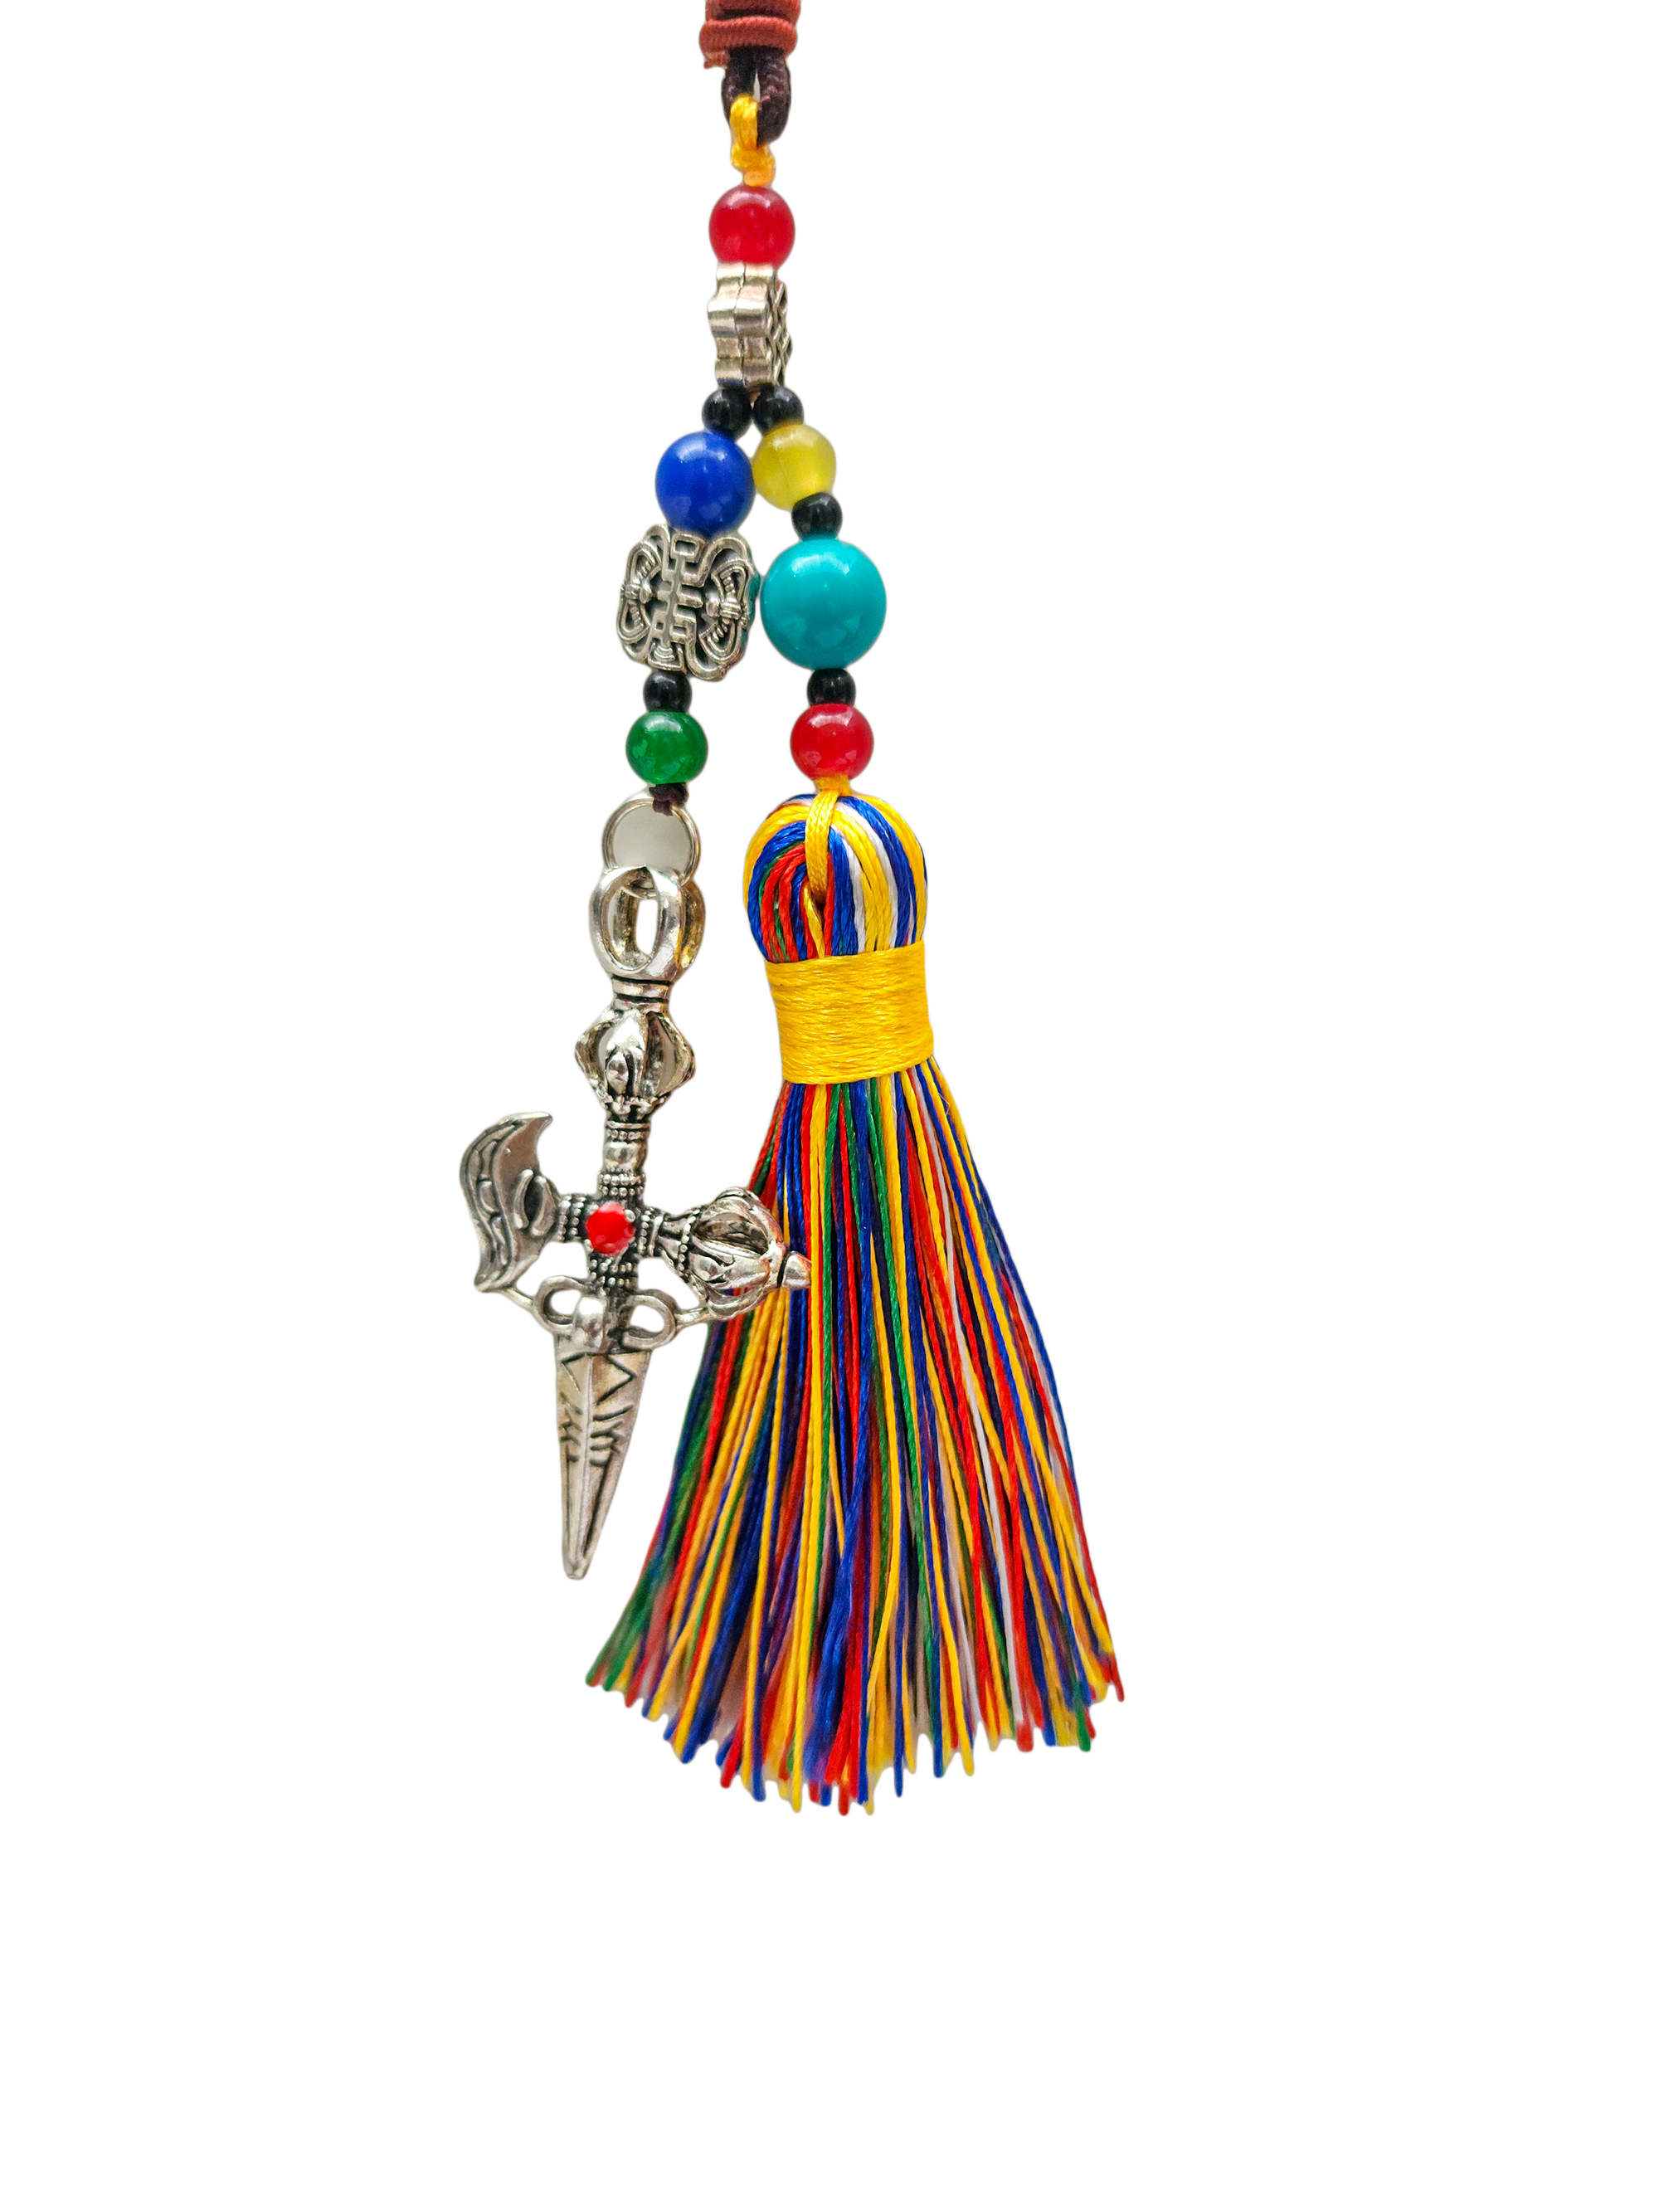 Buddhist Ritual Amulet Hanging With Phurba, For Wall, Altar, Bags And Keyring